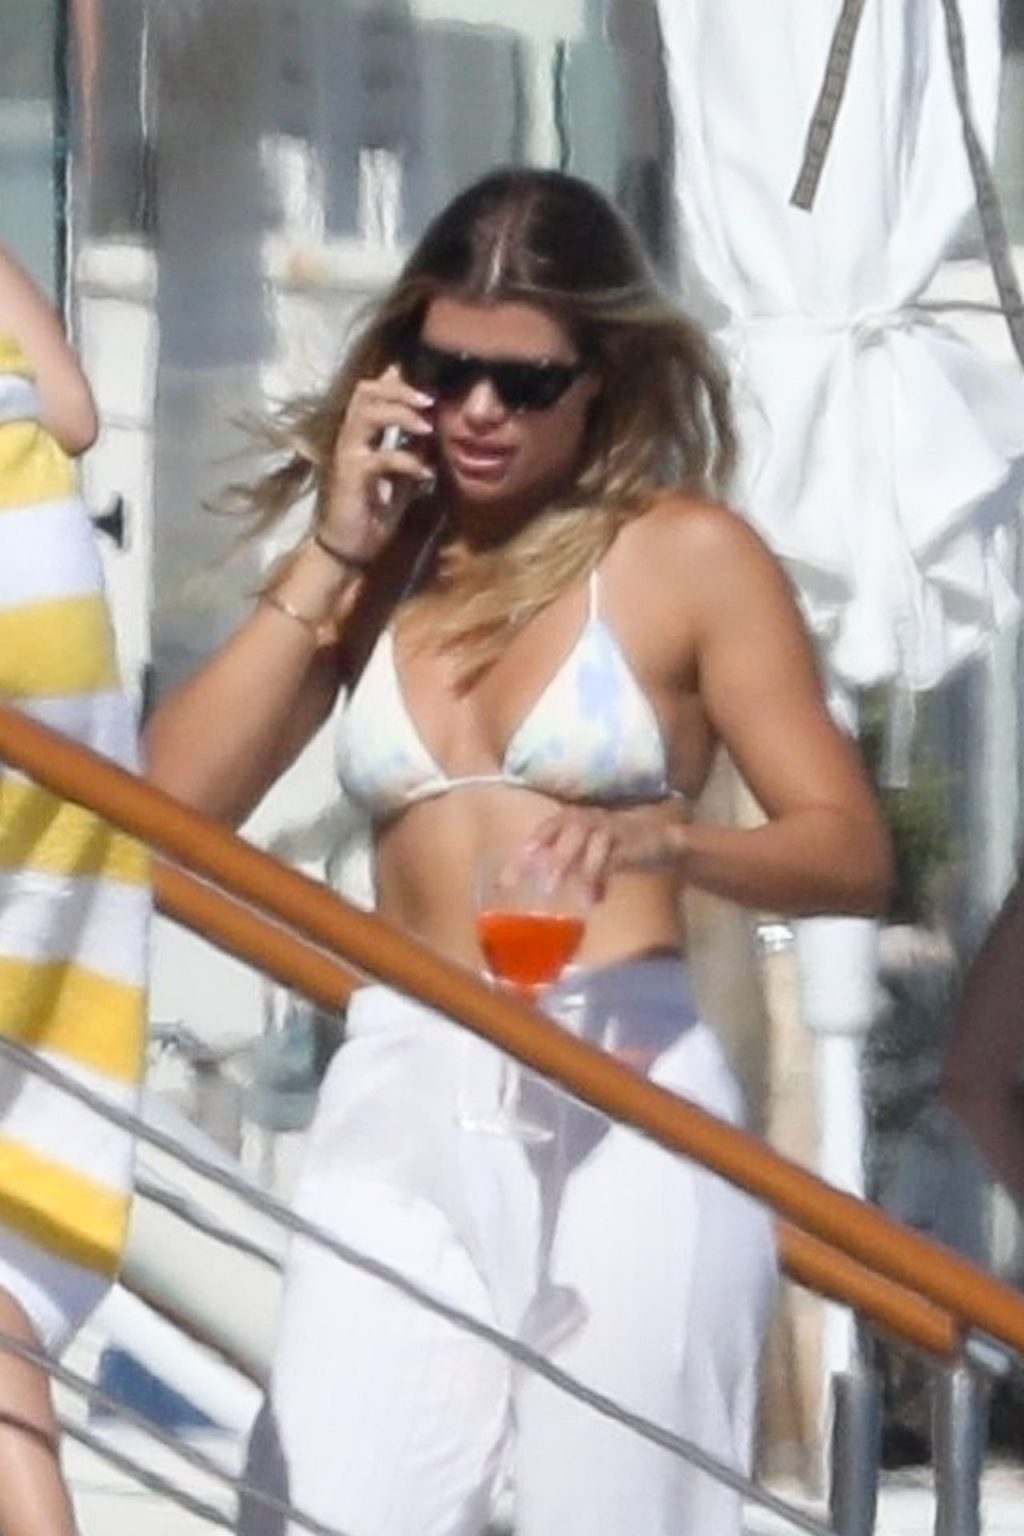 Sofia Richie Shows Off her Abs on the Beach (155 New Photos)